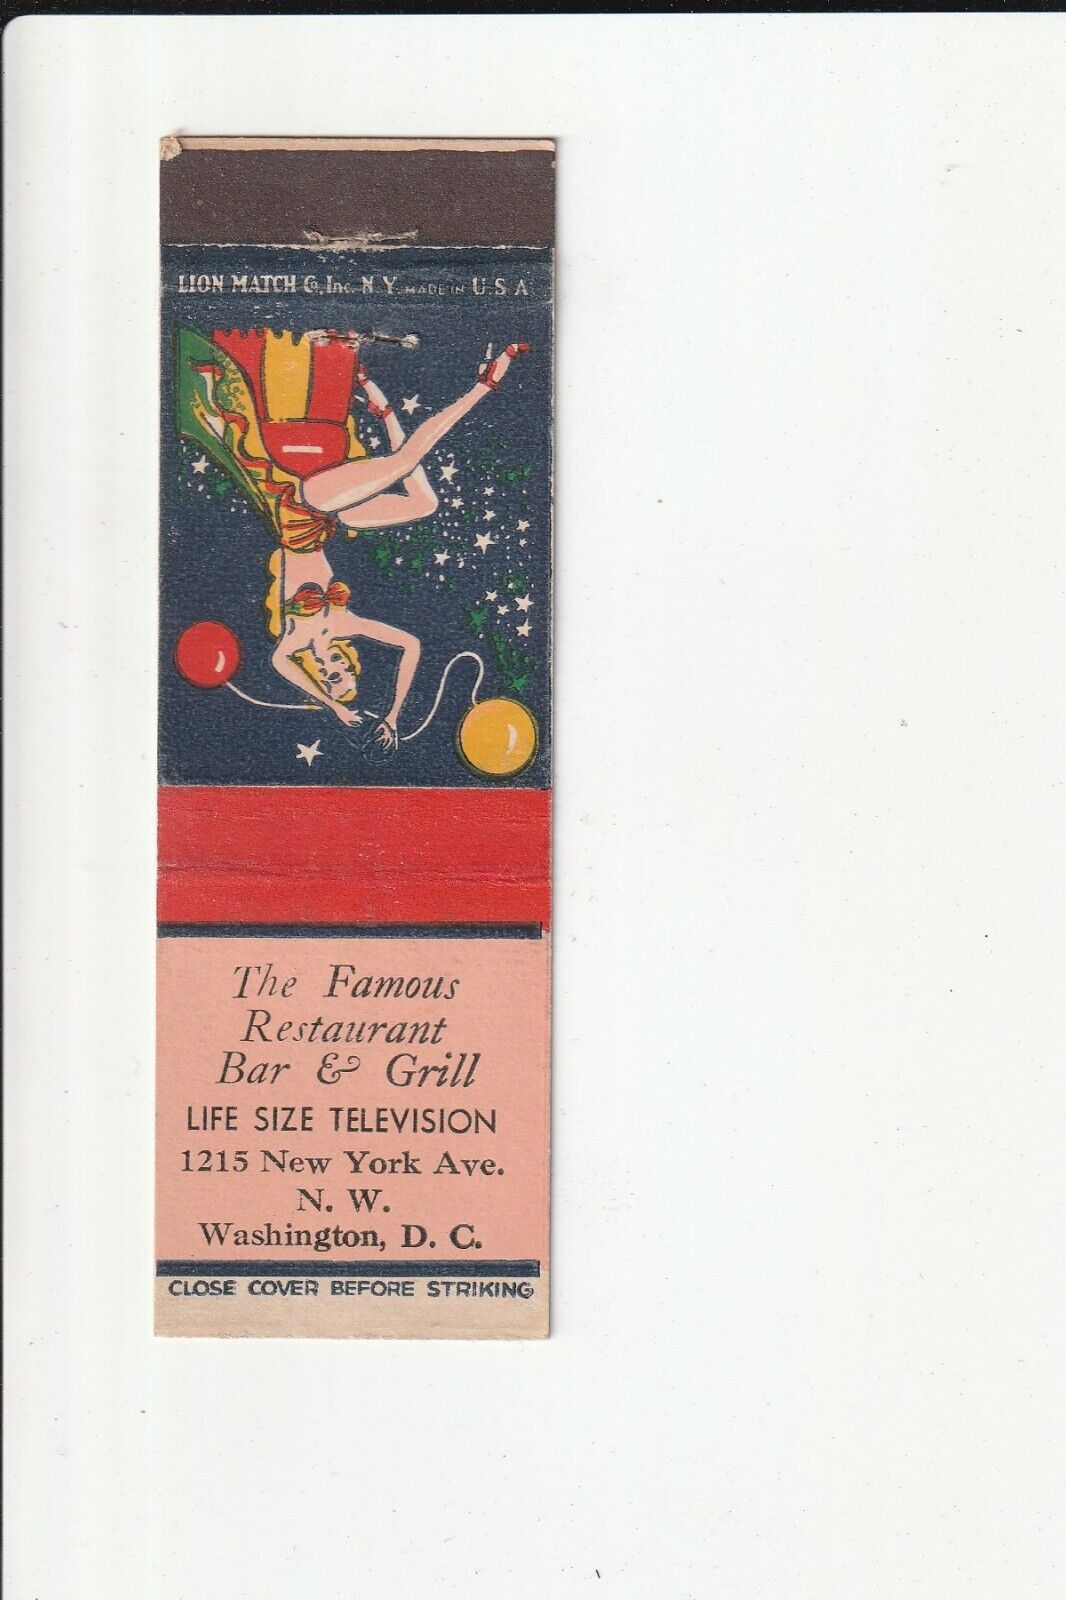 THE FAMOUS RESTAURANT BAR & GRILL 1215 NY AVE WASH. D.C. VINTAGE MATCHBOOK COVER